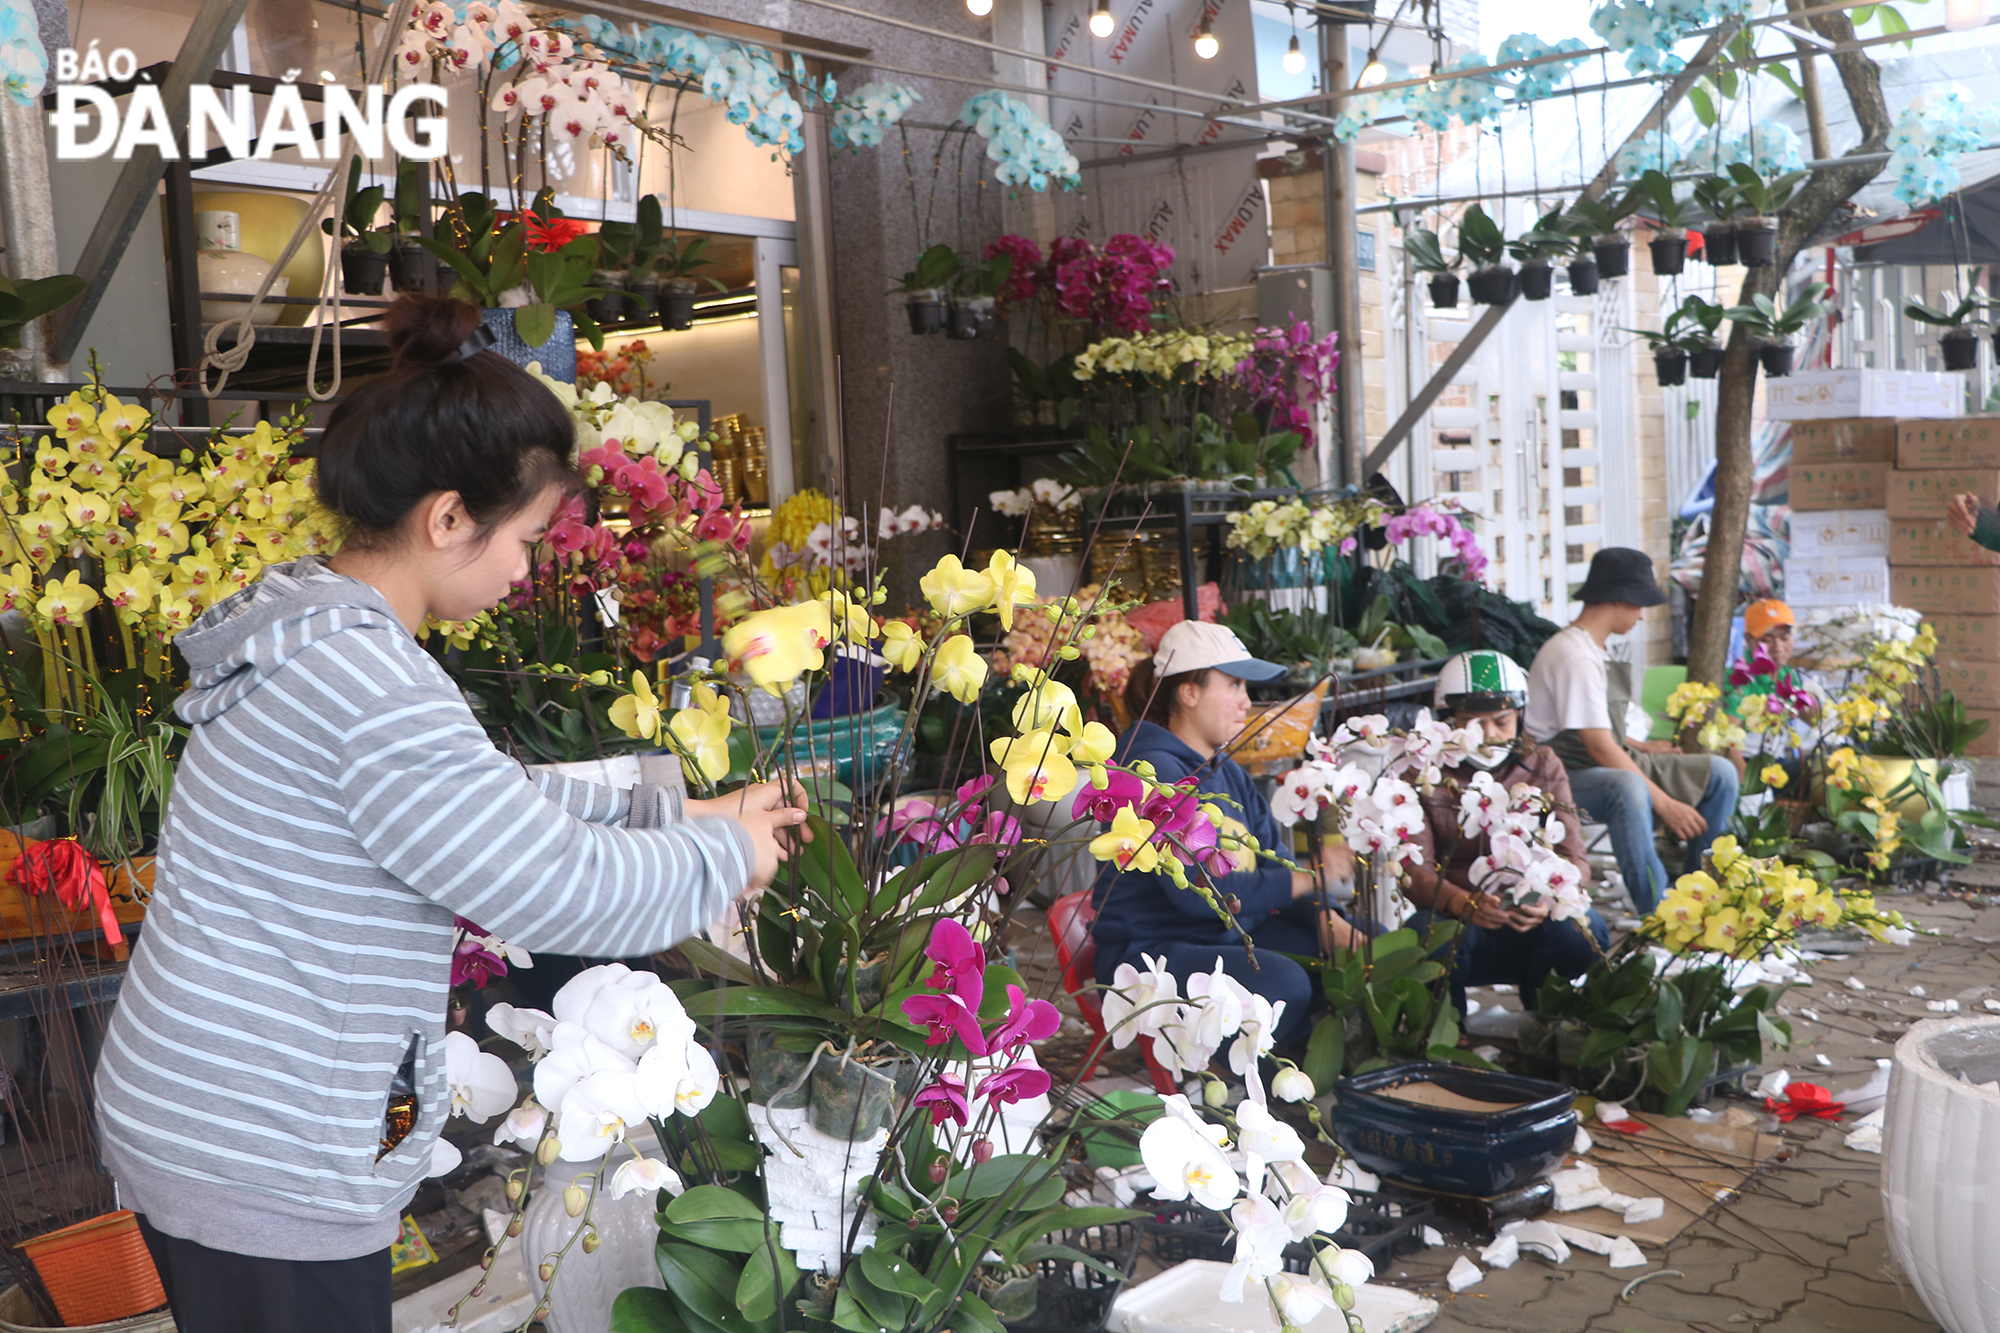 In addition to the available flower samples, the shops are providing orchid arrangement services at the request of customers.